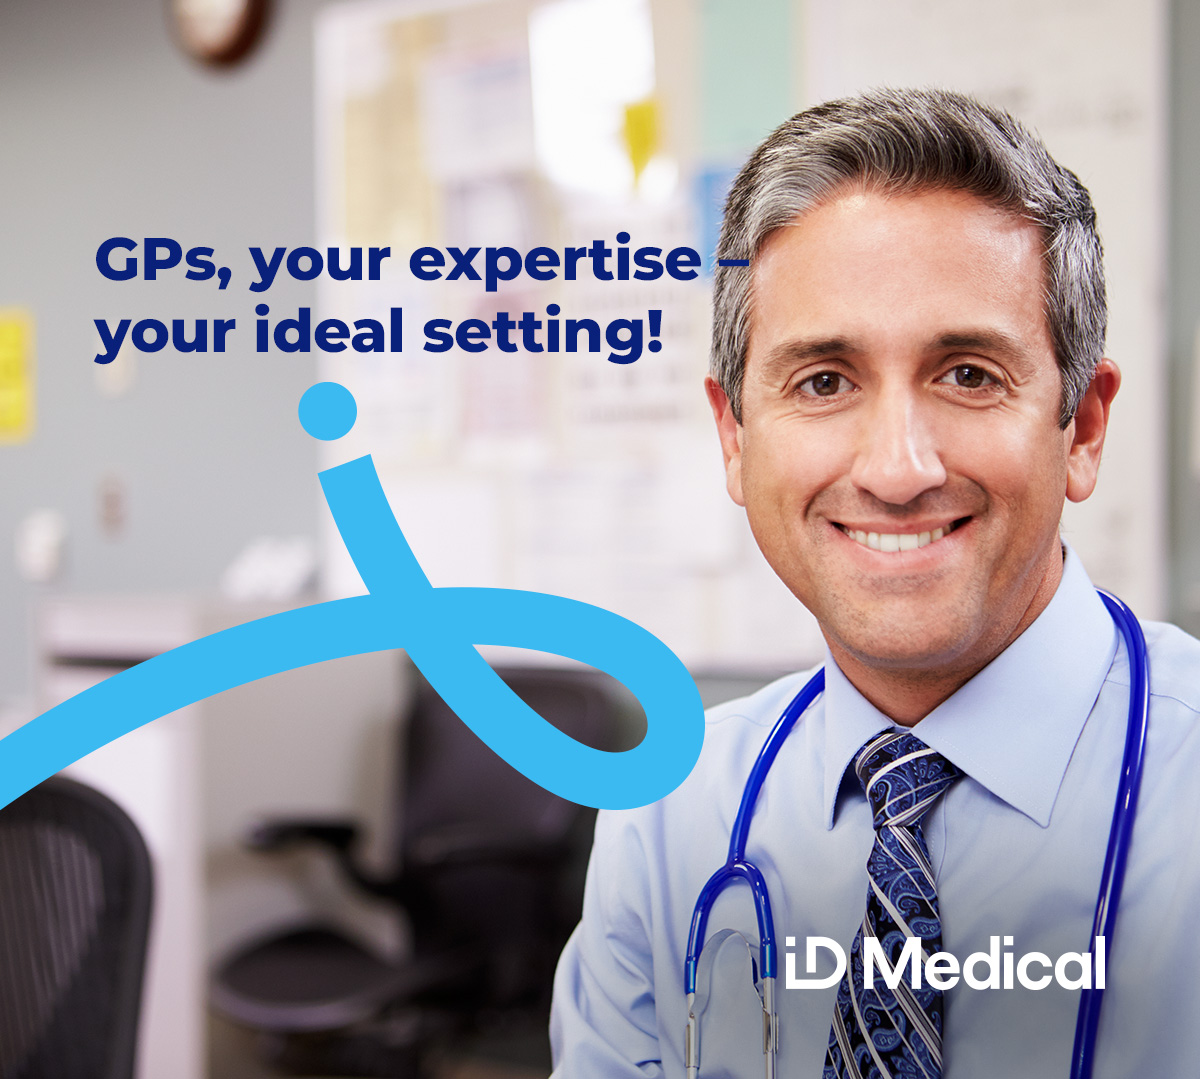 Whether you thrive in GP surgeries, support in prisons or excel in video consultations – we have the perfect setting for you.

Join us in delivering comprehensive and accessible healthcare, nationwide.

hubs.la/Q02kwXQW0 

#NHS #PrimaryCare #GPs #GPJobs #IDMedical #MRCGP